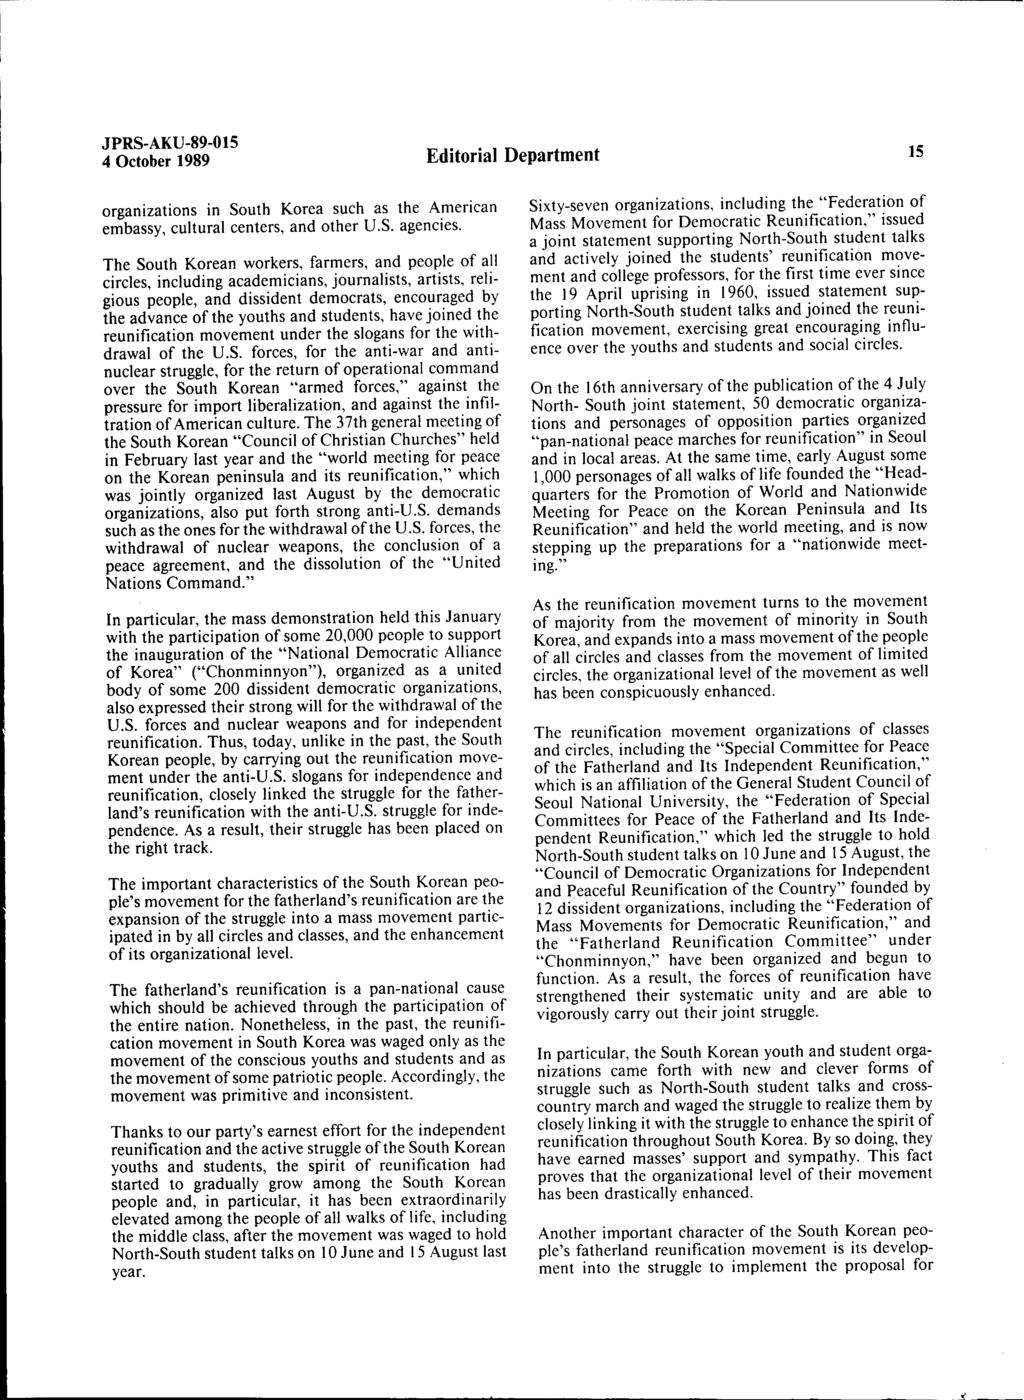 4 October 1989 Editorial Department 15 organizations in South Korea such as the American embassy, cultural centers, and other U.S. agencies.